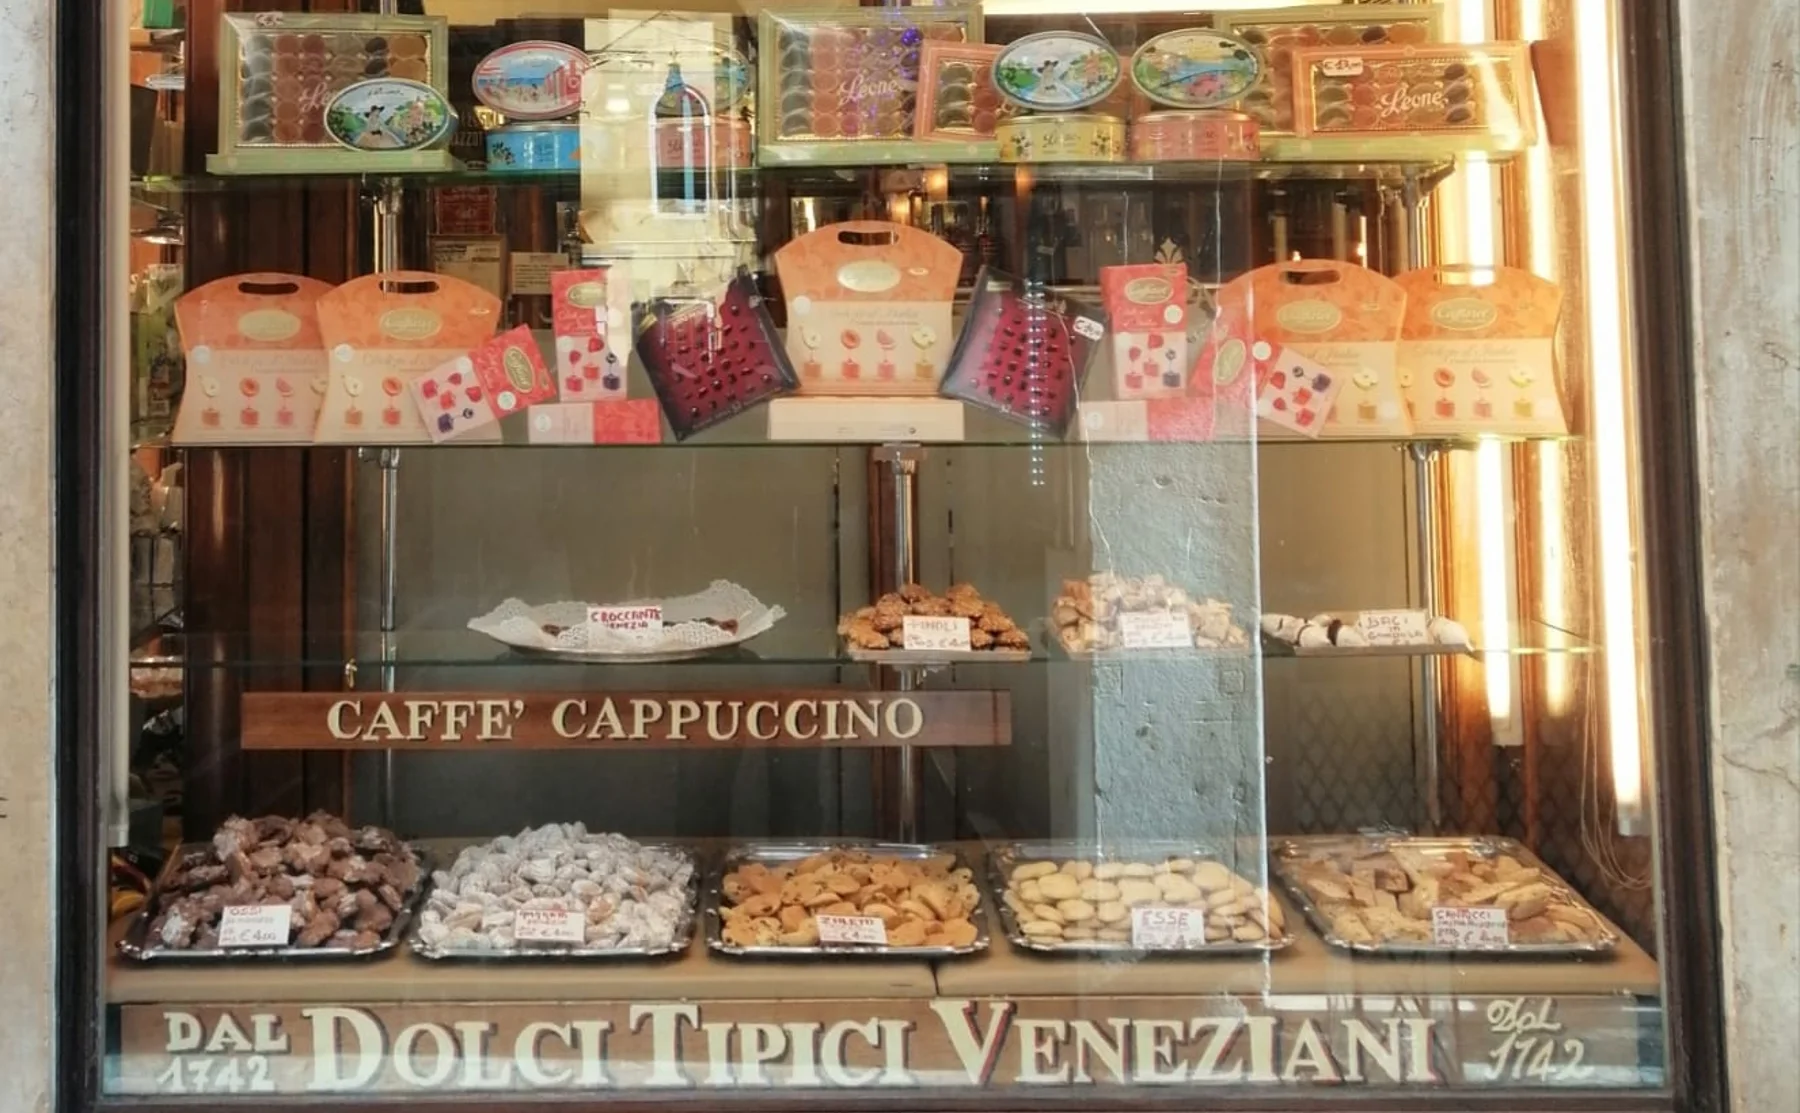 The Sweet Heart of Venice: Pastry, Ice cream&Cafès - 1383505